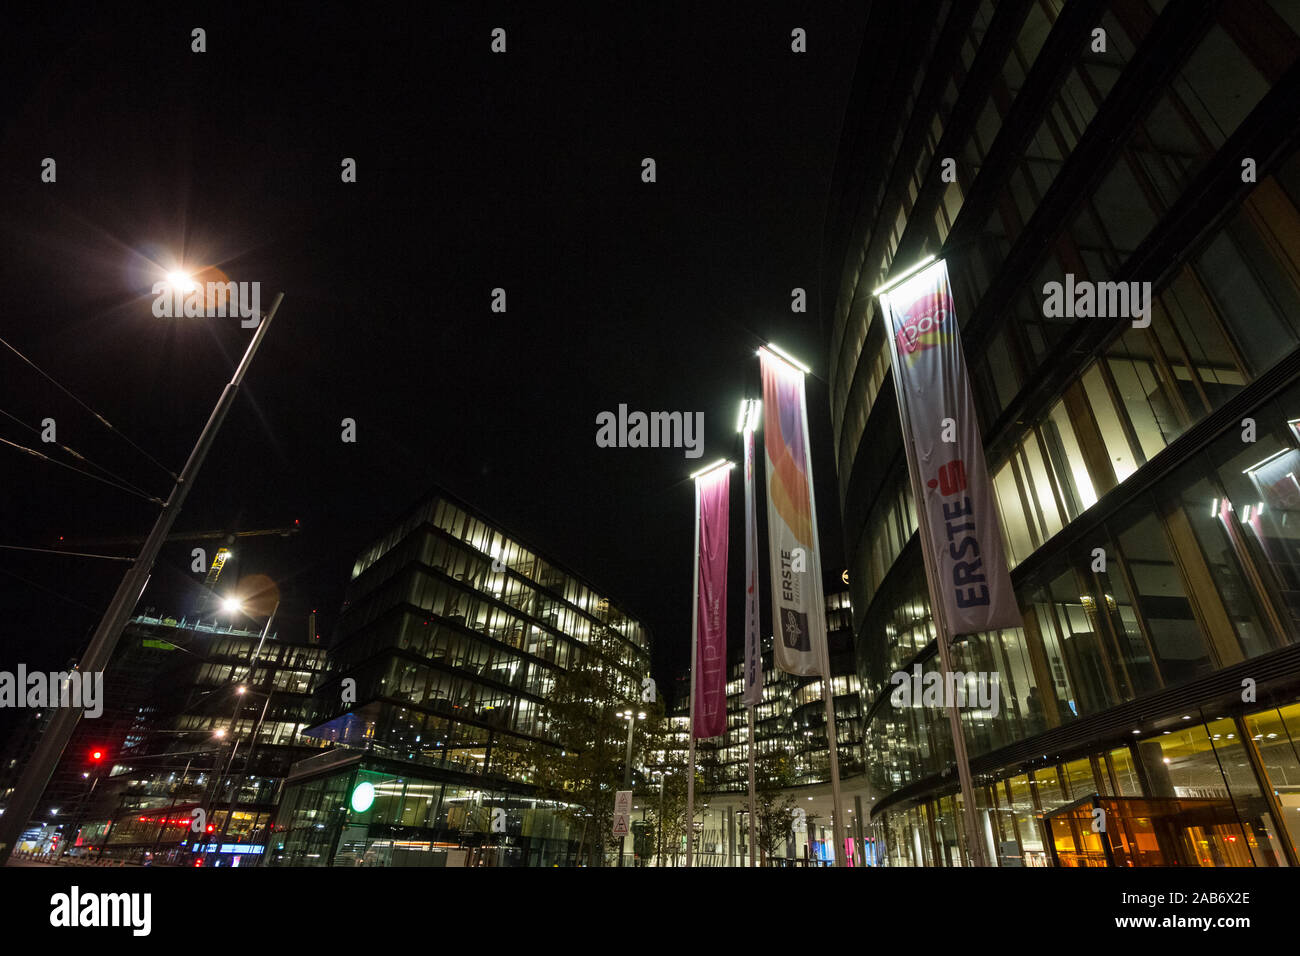 VIENNA, AUSTRIA - NOVEMBER 6, 2019: Erste bank logo in front of Erste campus, the headquarters of Sparkasse with skyscrapers, the biggest bank of cent Stock Photo